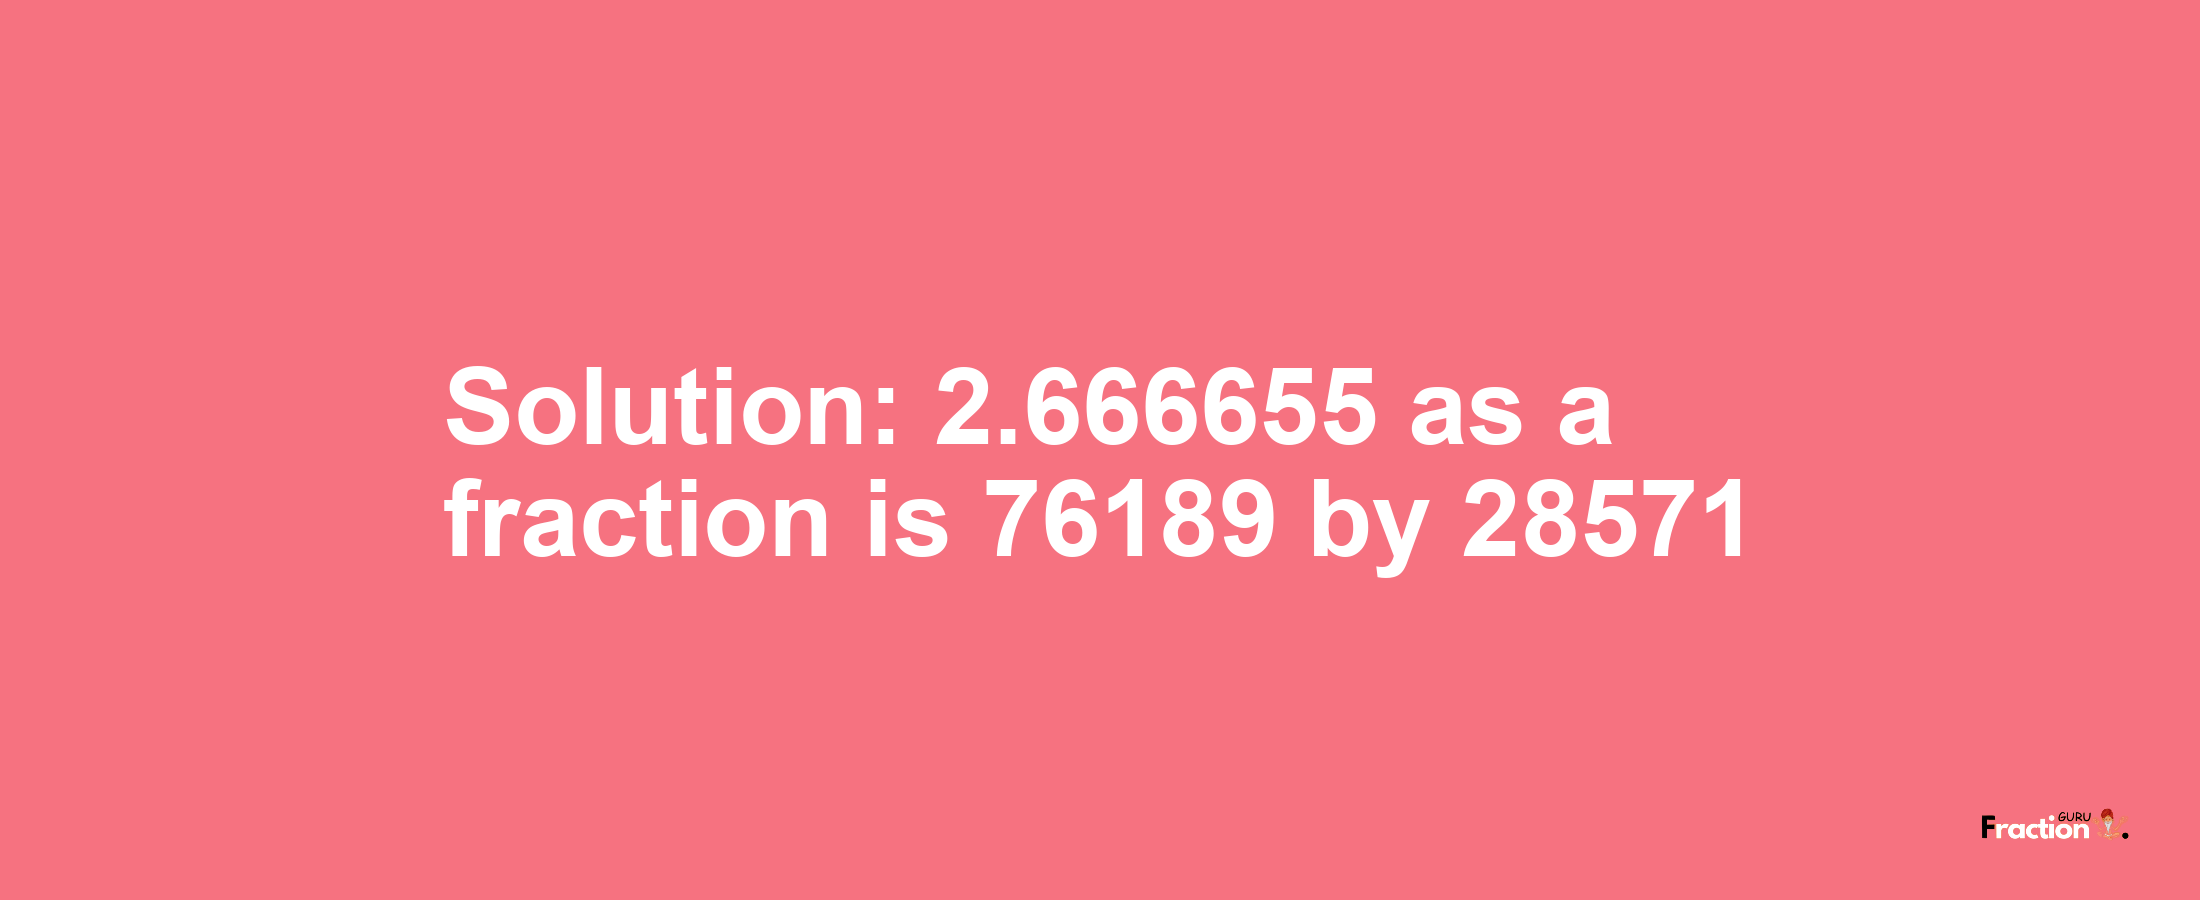 Solution:2.666655 as a fraction is 76189/28571